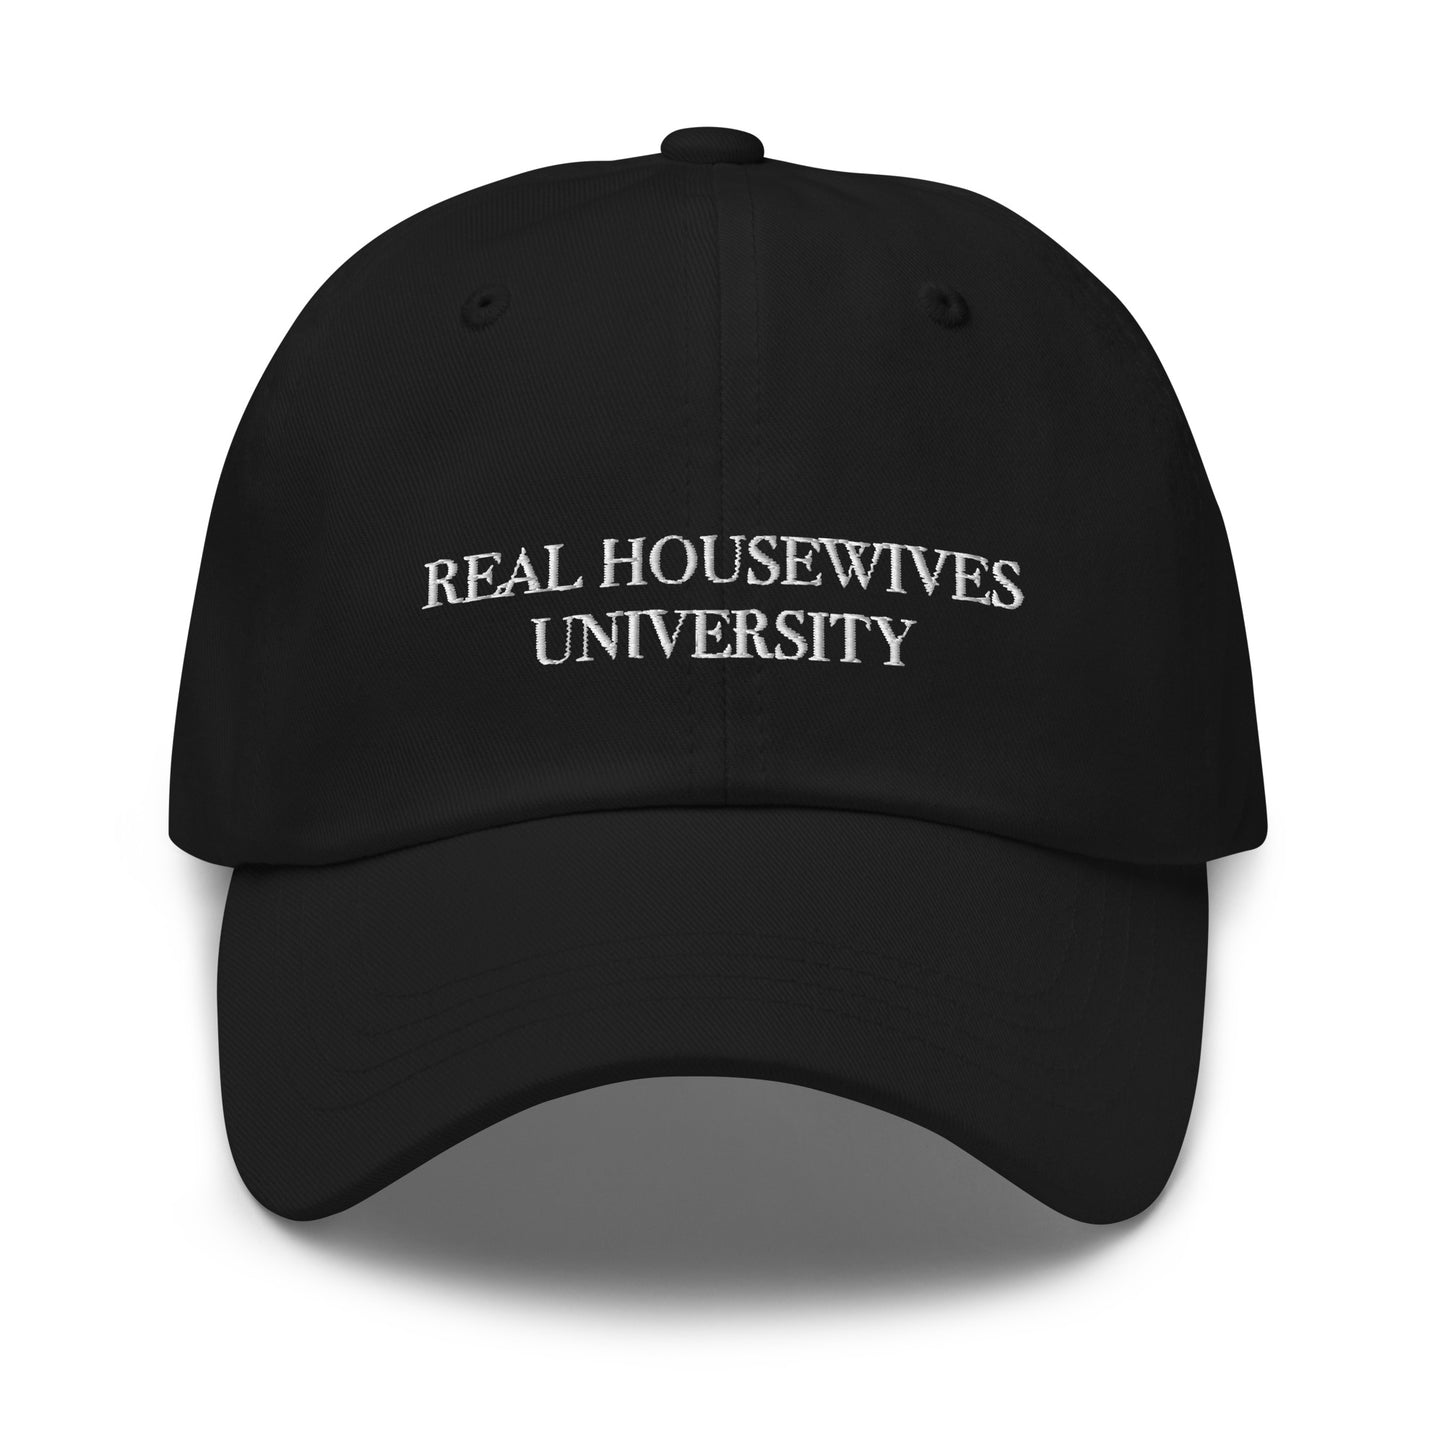 Real Housewives University - Dad hat